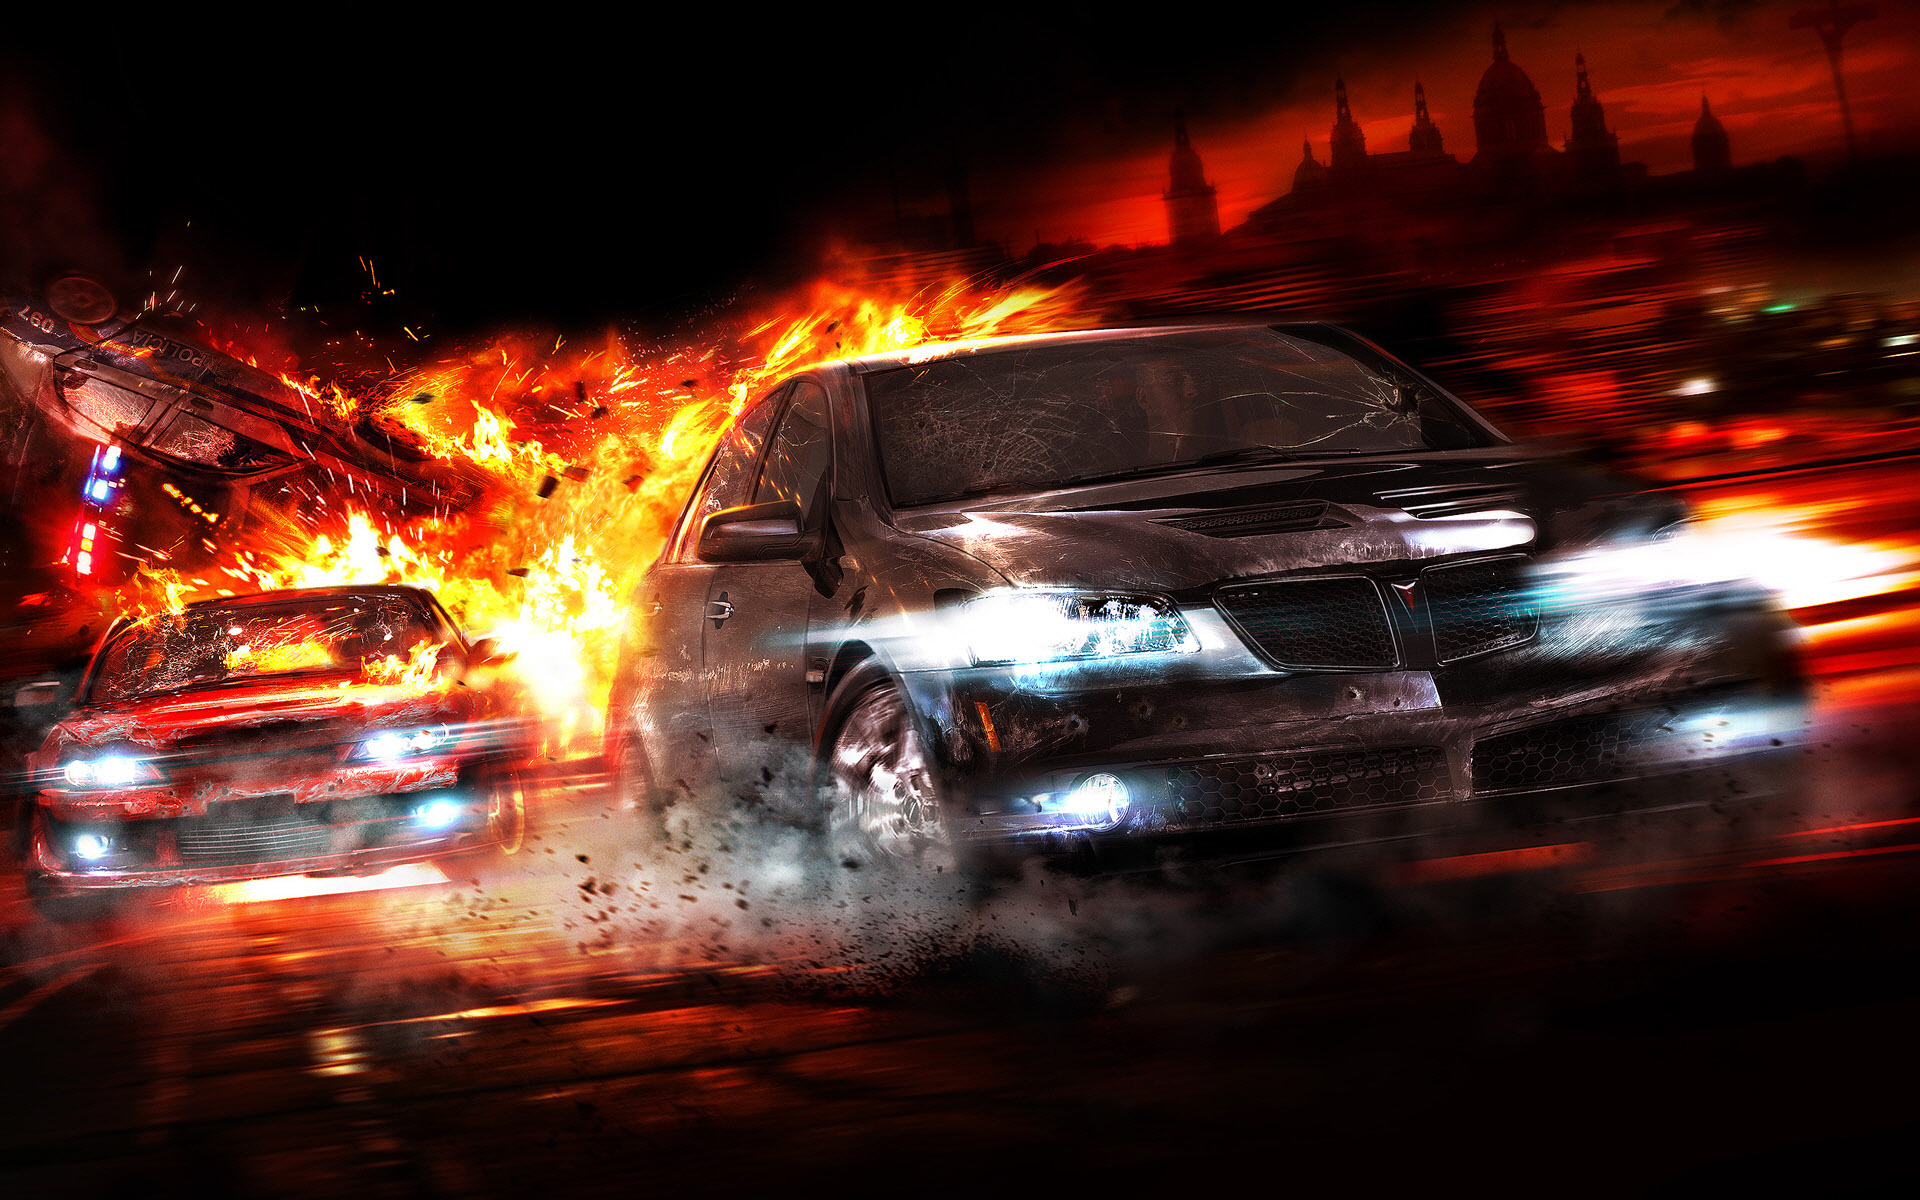 cars, Explosions, Pontiac, Police, Cars Wallpaper